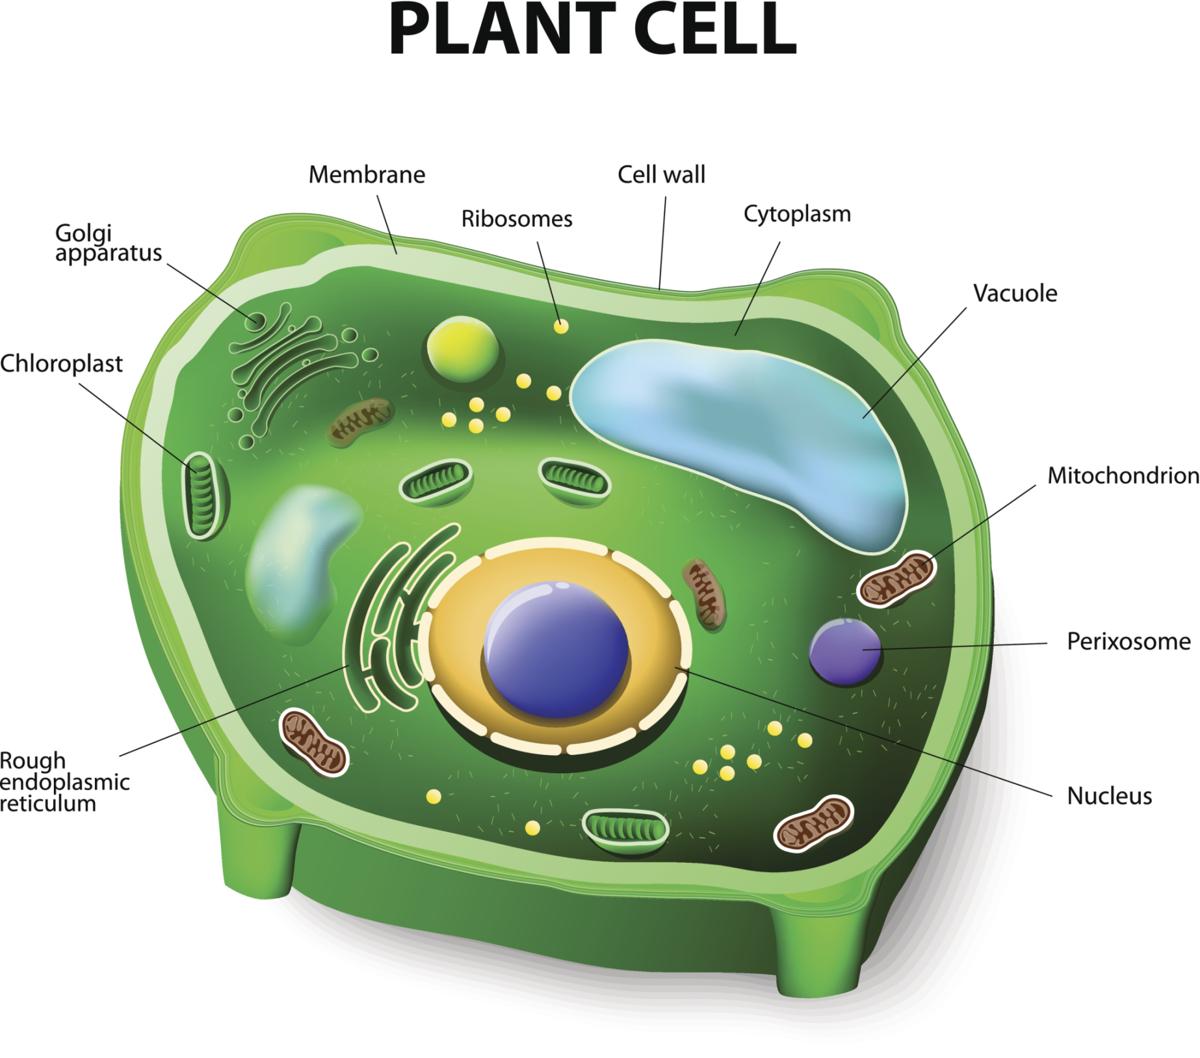 major plant cell organelles